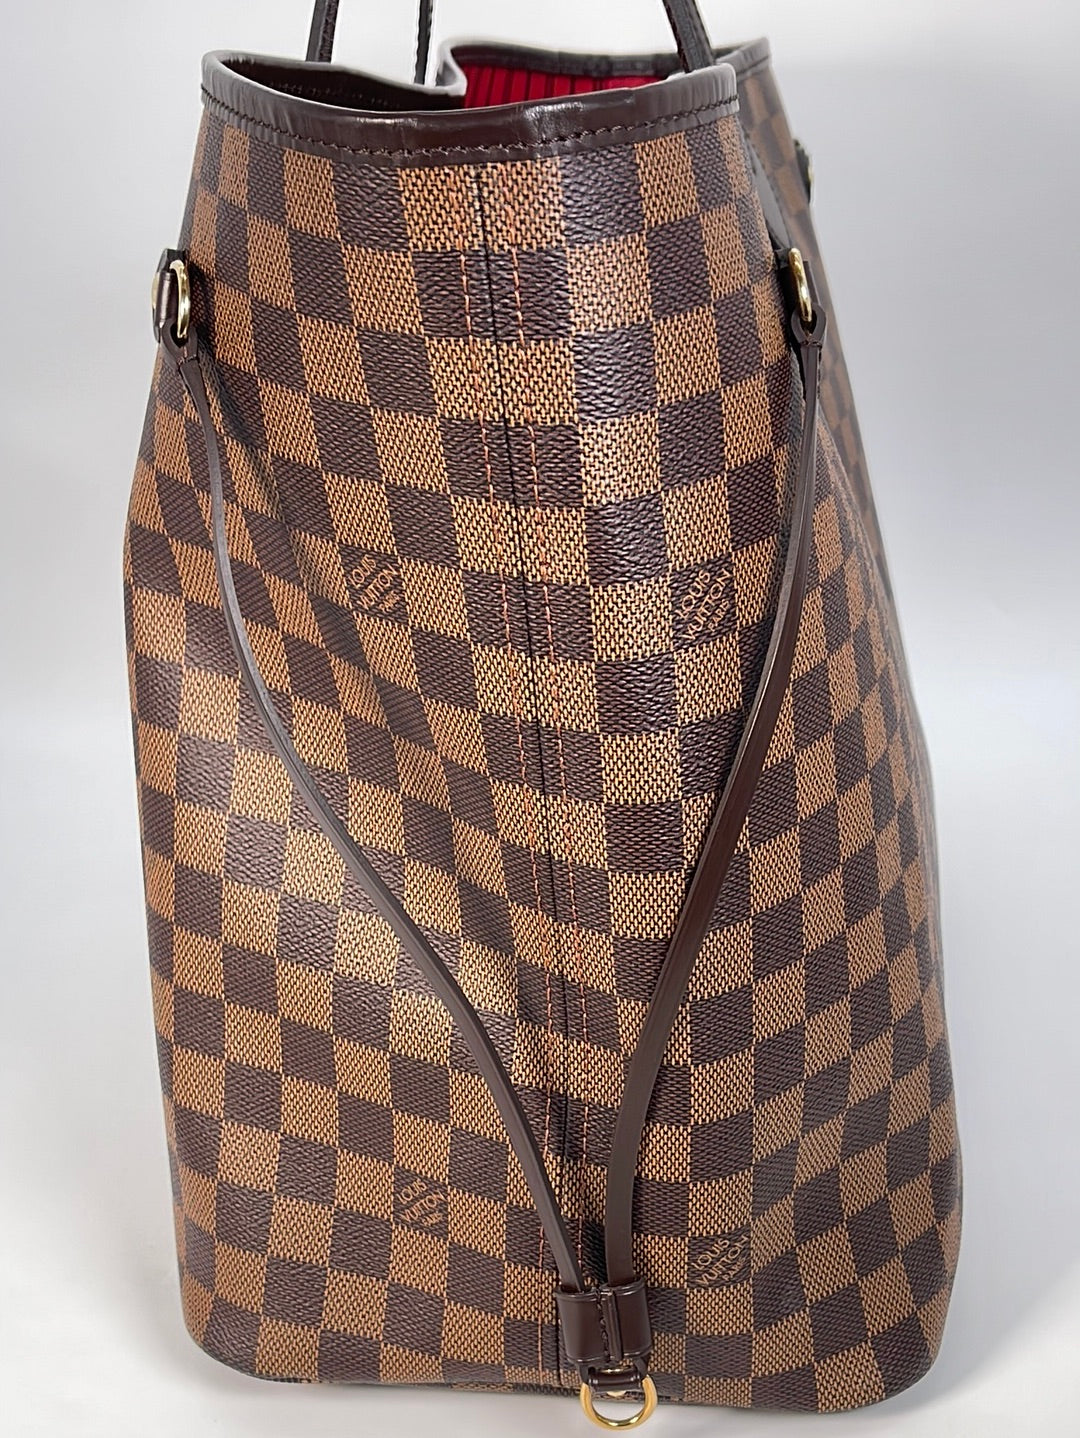 Sold at Auction: AUTHENTIC LOUIS VUITTON NEVERFULL GM DAMIER CANVAS,  LEATHER TOTE